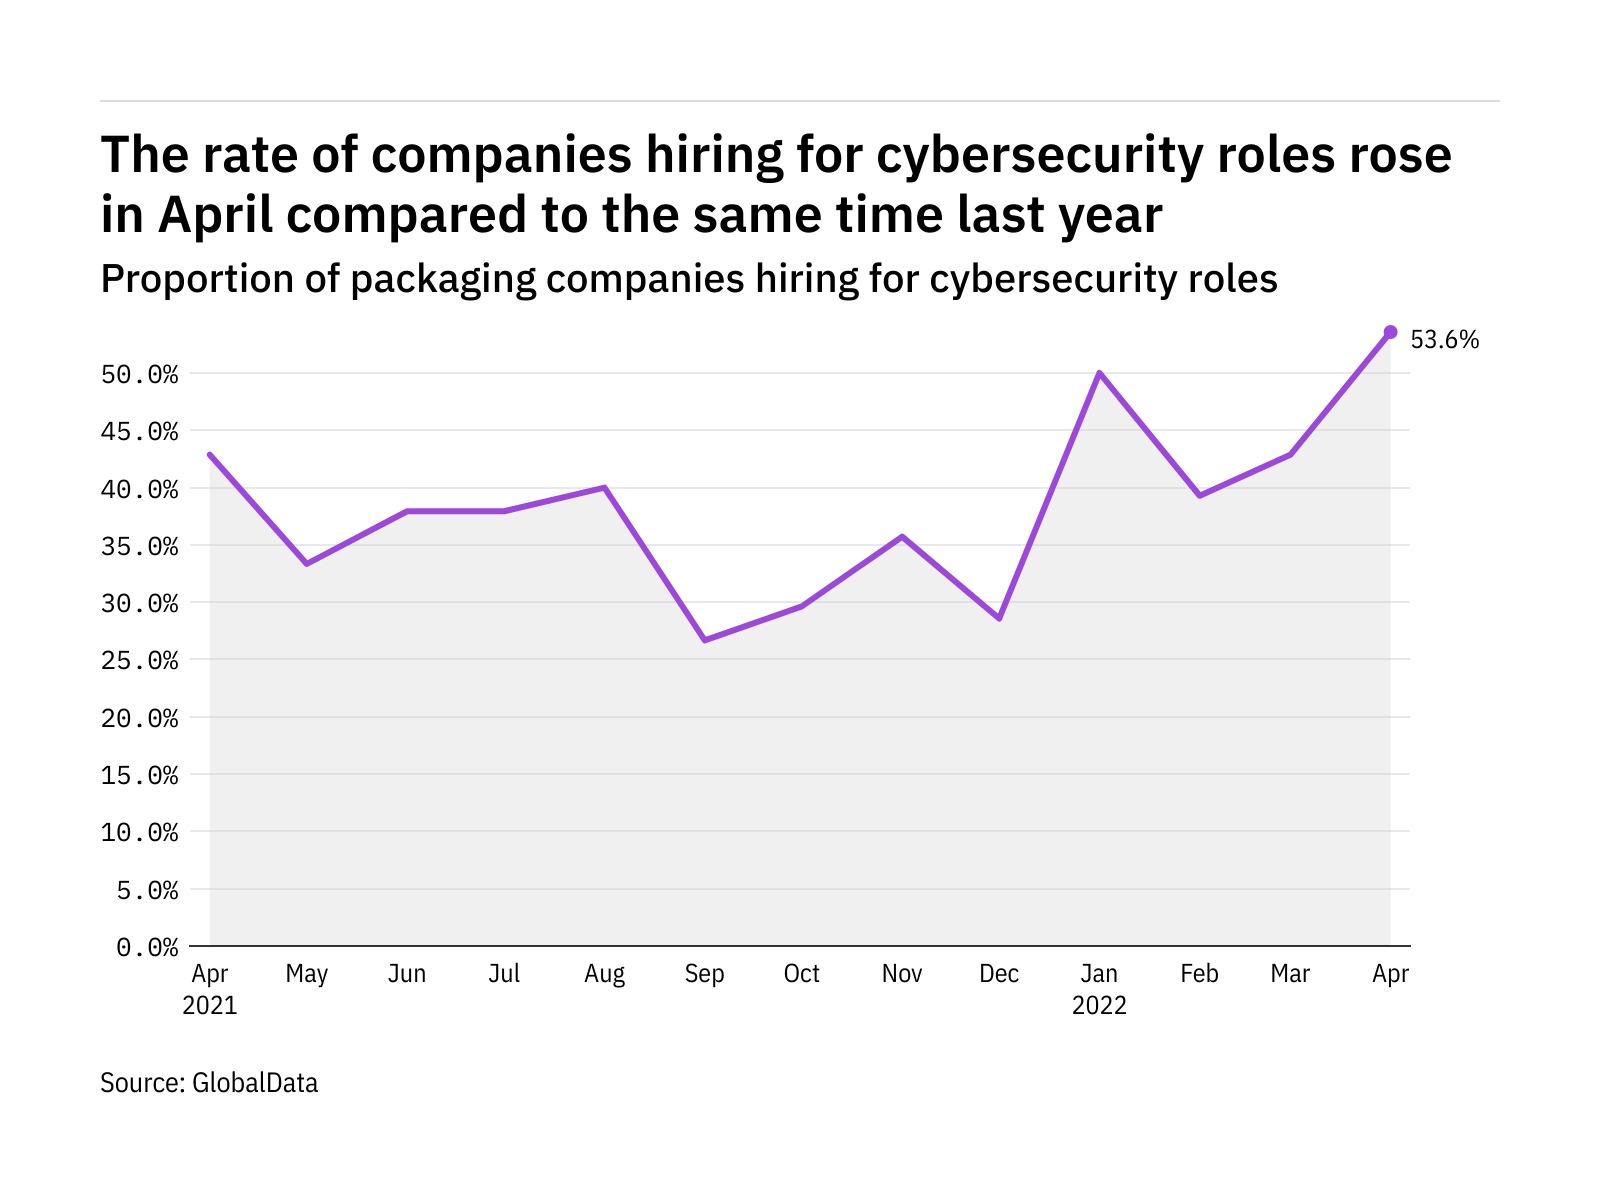 Cybersecurity hiring levels in the packaging industry rose to a year-high in April 2022